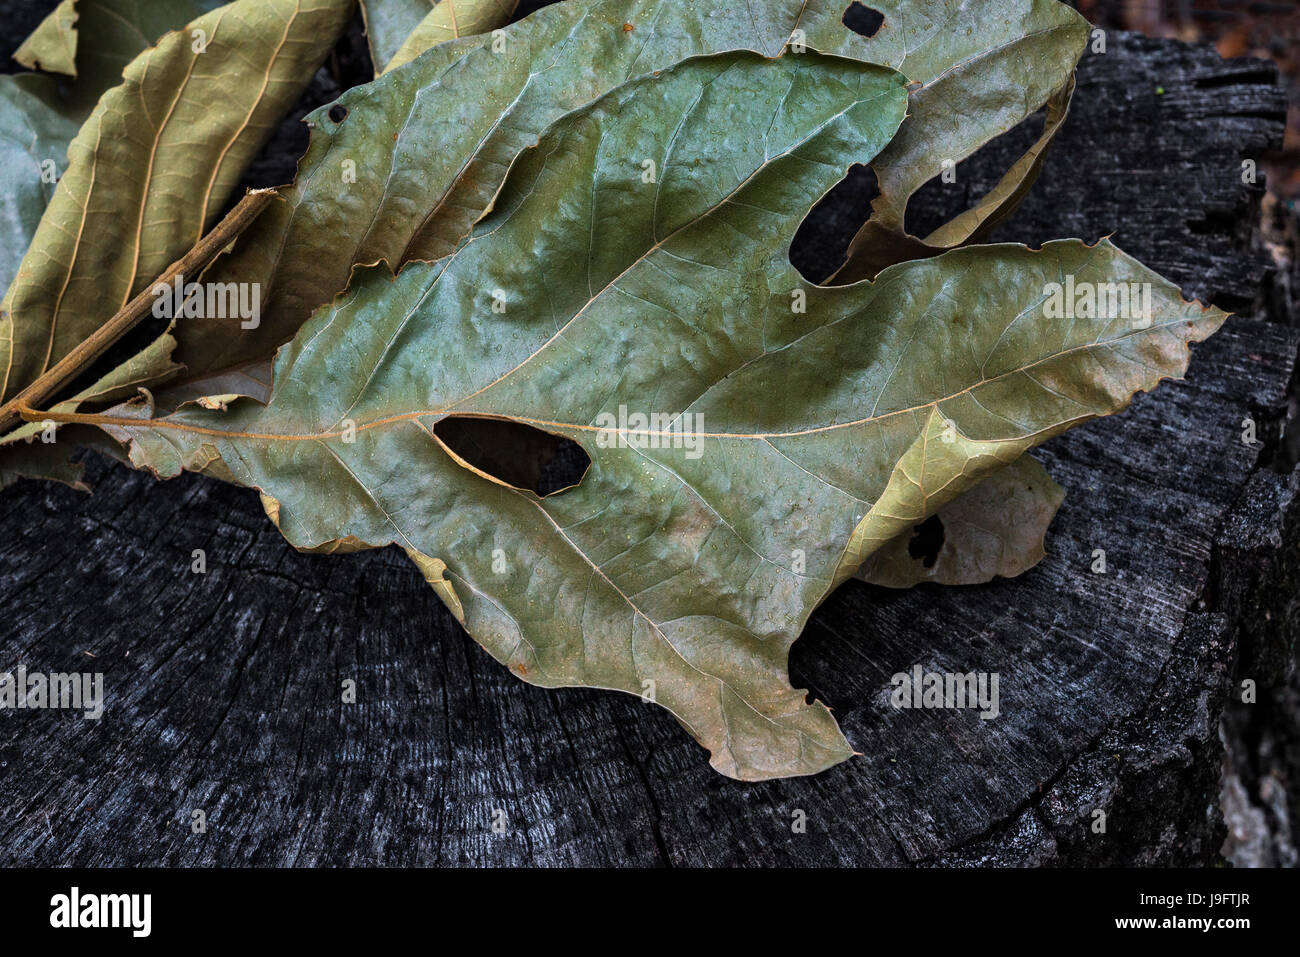 Dried up leaf cluster from oak tree. Stock Photo